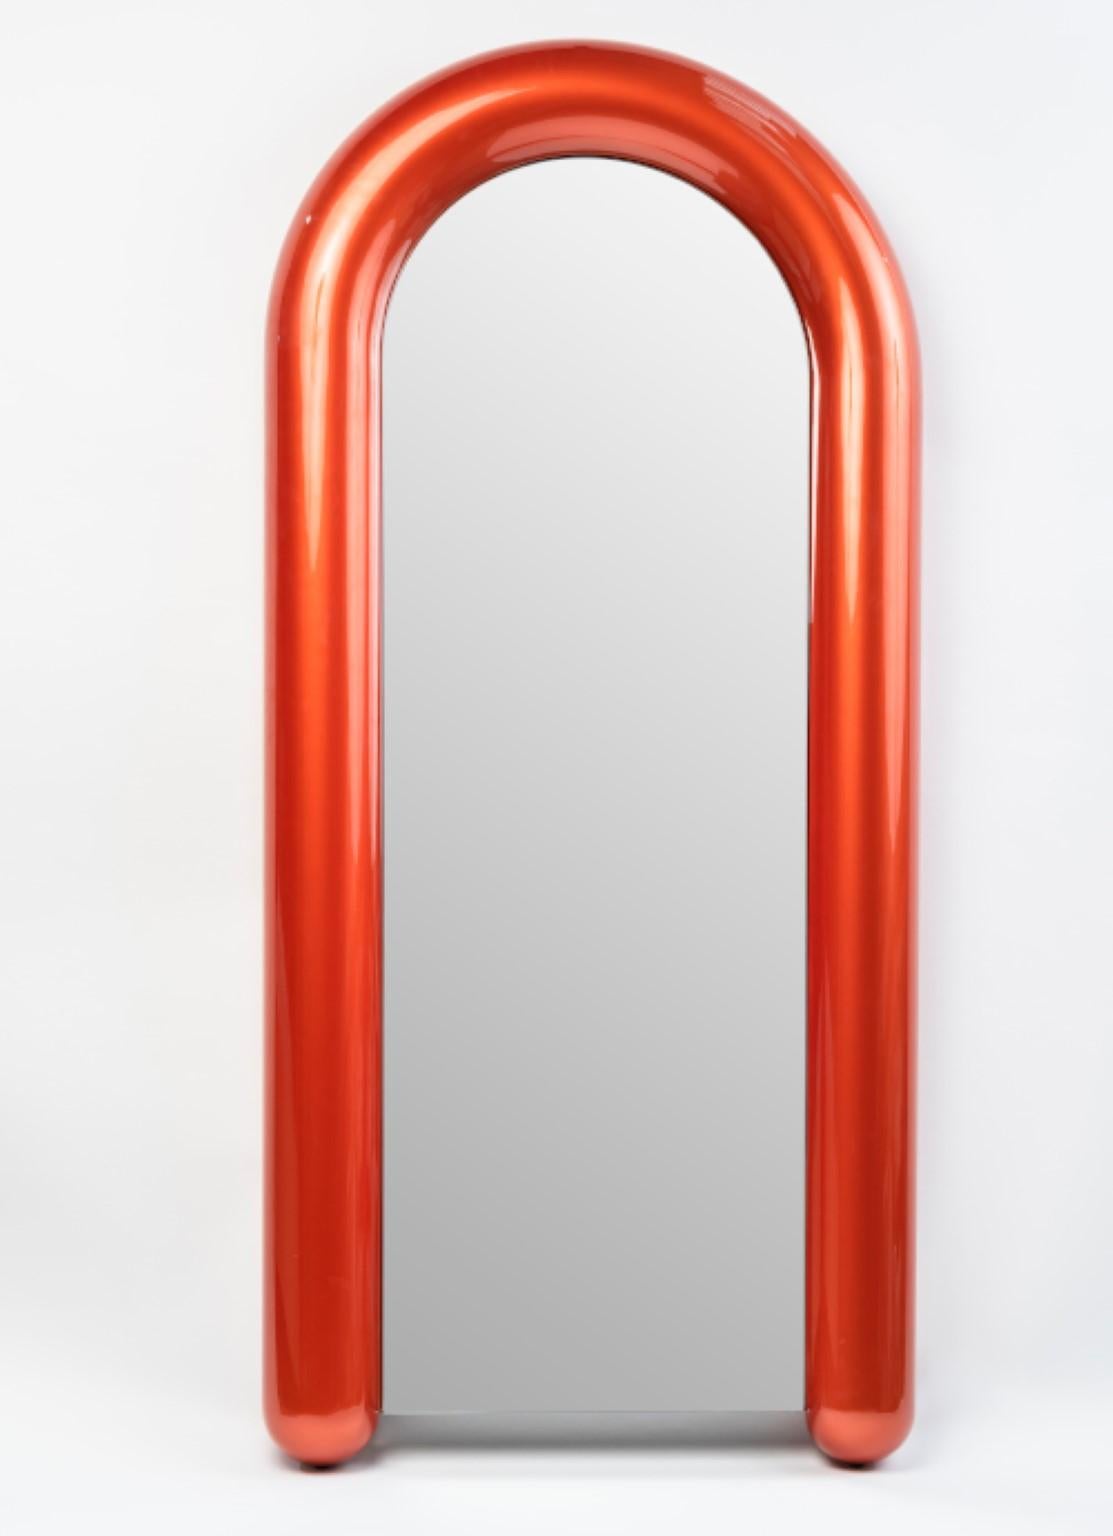 Soufflé mirror by Luca Nichetto 
Dimensions: W91.5 x D16 x H200 cm
Materials: Liquid painted menthol chrome/coral chrome/prune chrome metal structure

With a playful design and puffy appearance, the Soufflé mirror lives up to its name, further